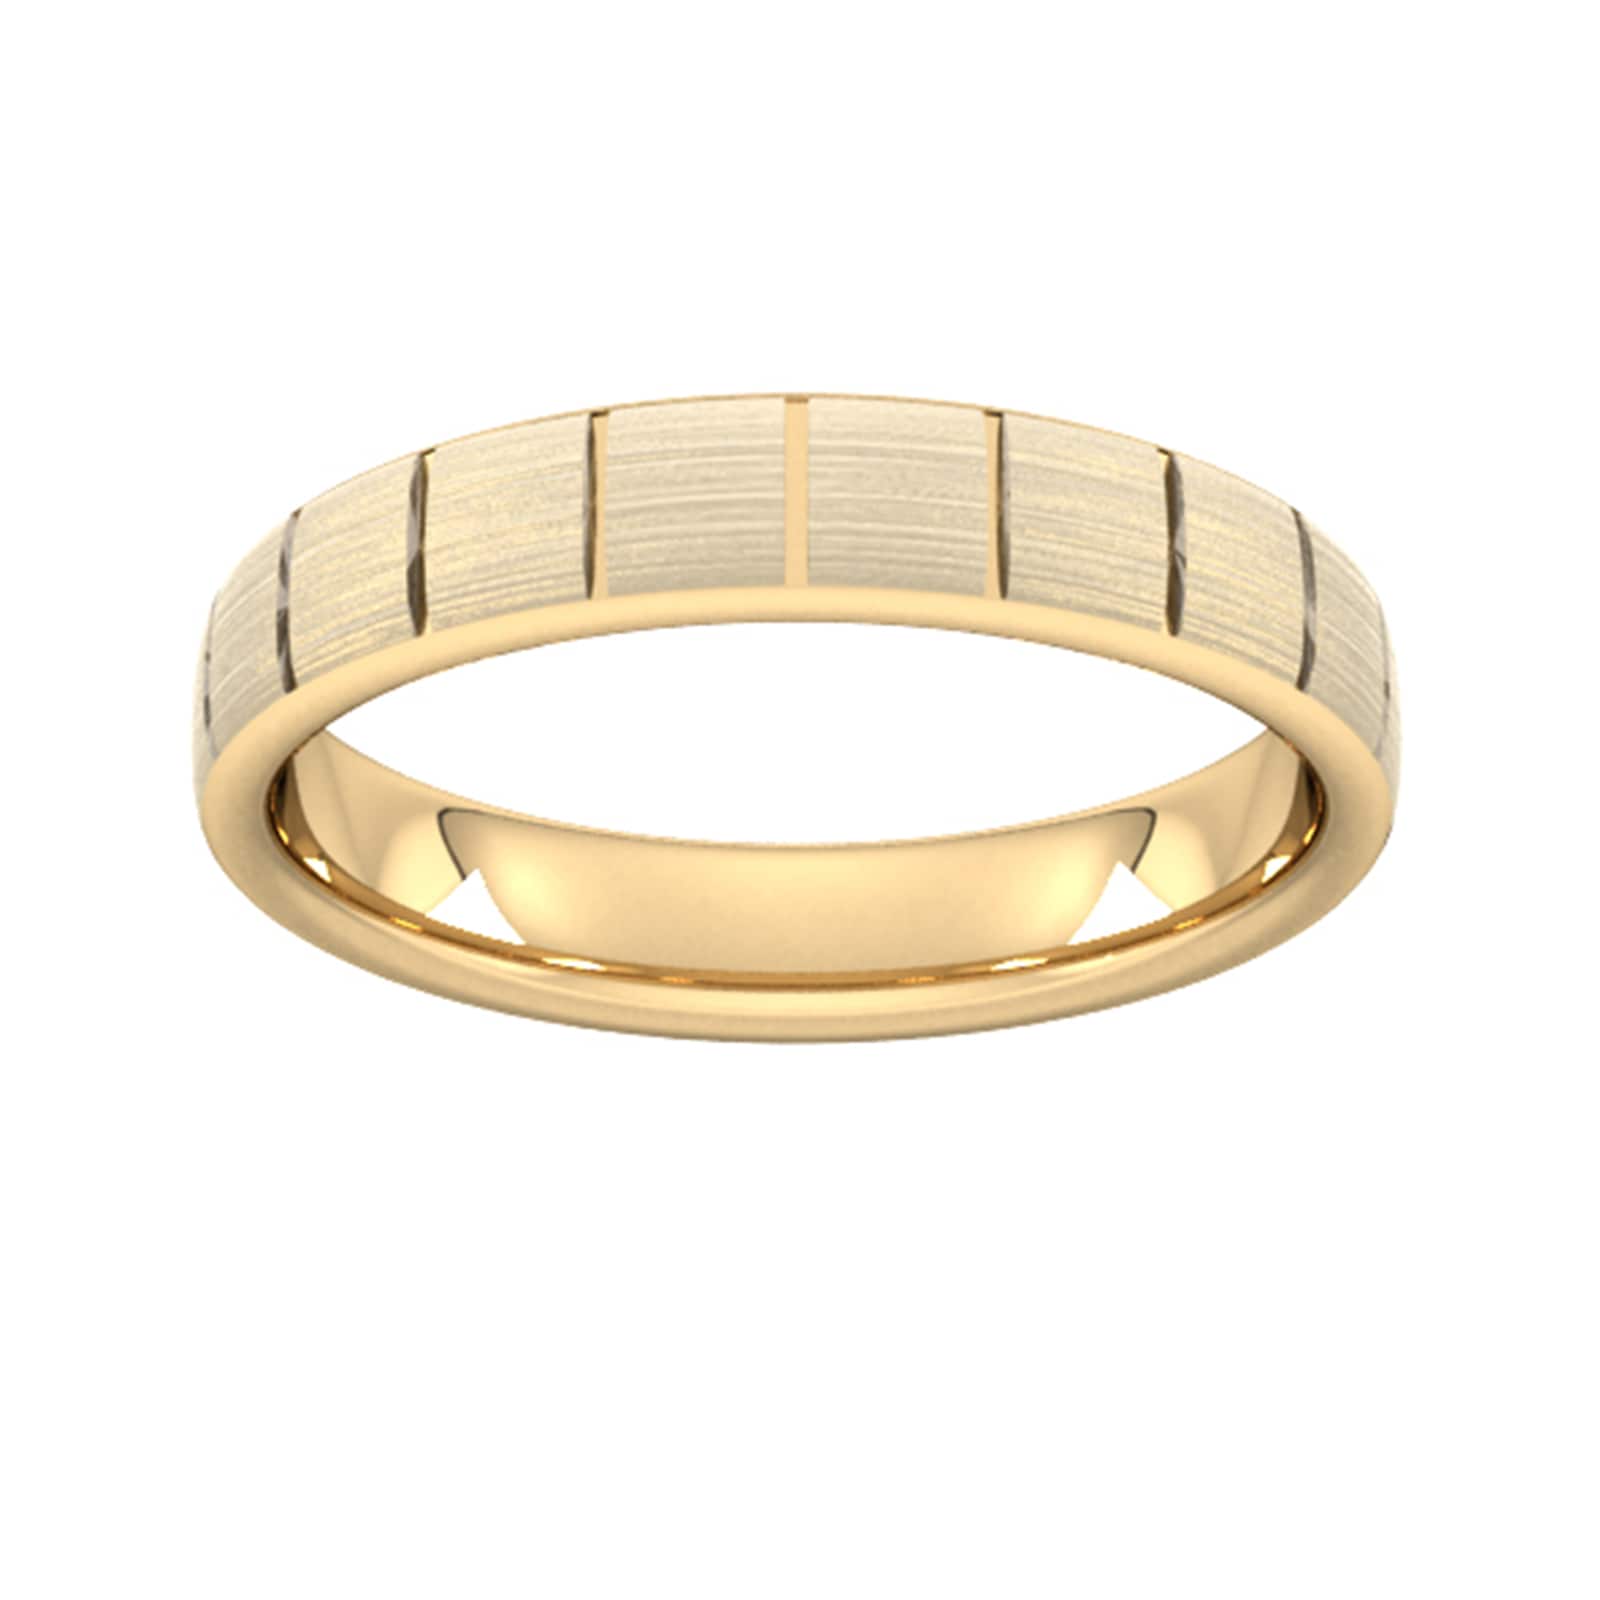 4mm Slight Court Standard Vertical Lines Wedding Ring In 18 Carat Yellow Gold - Ring Size I